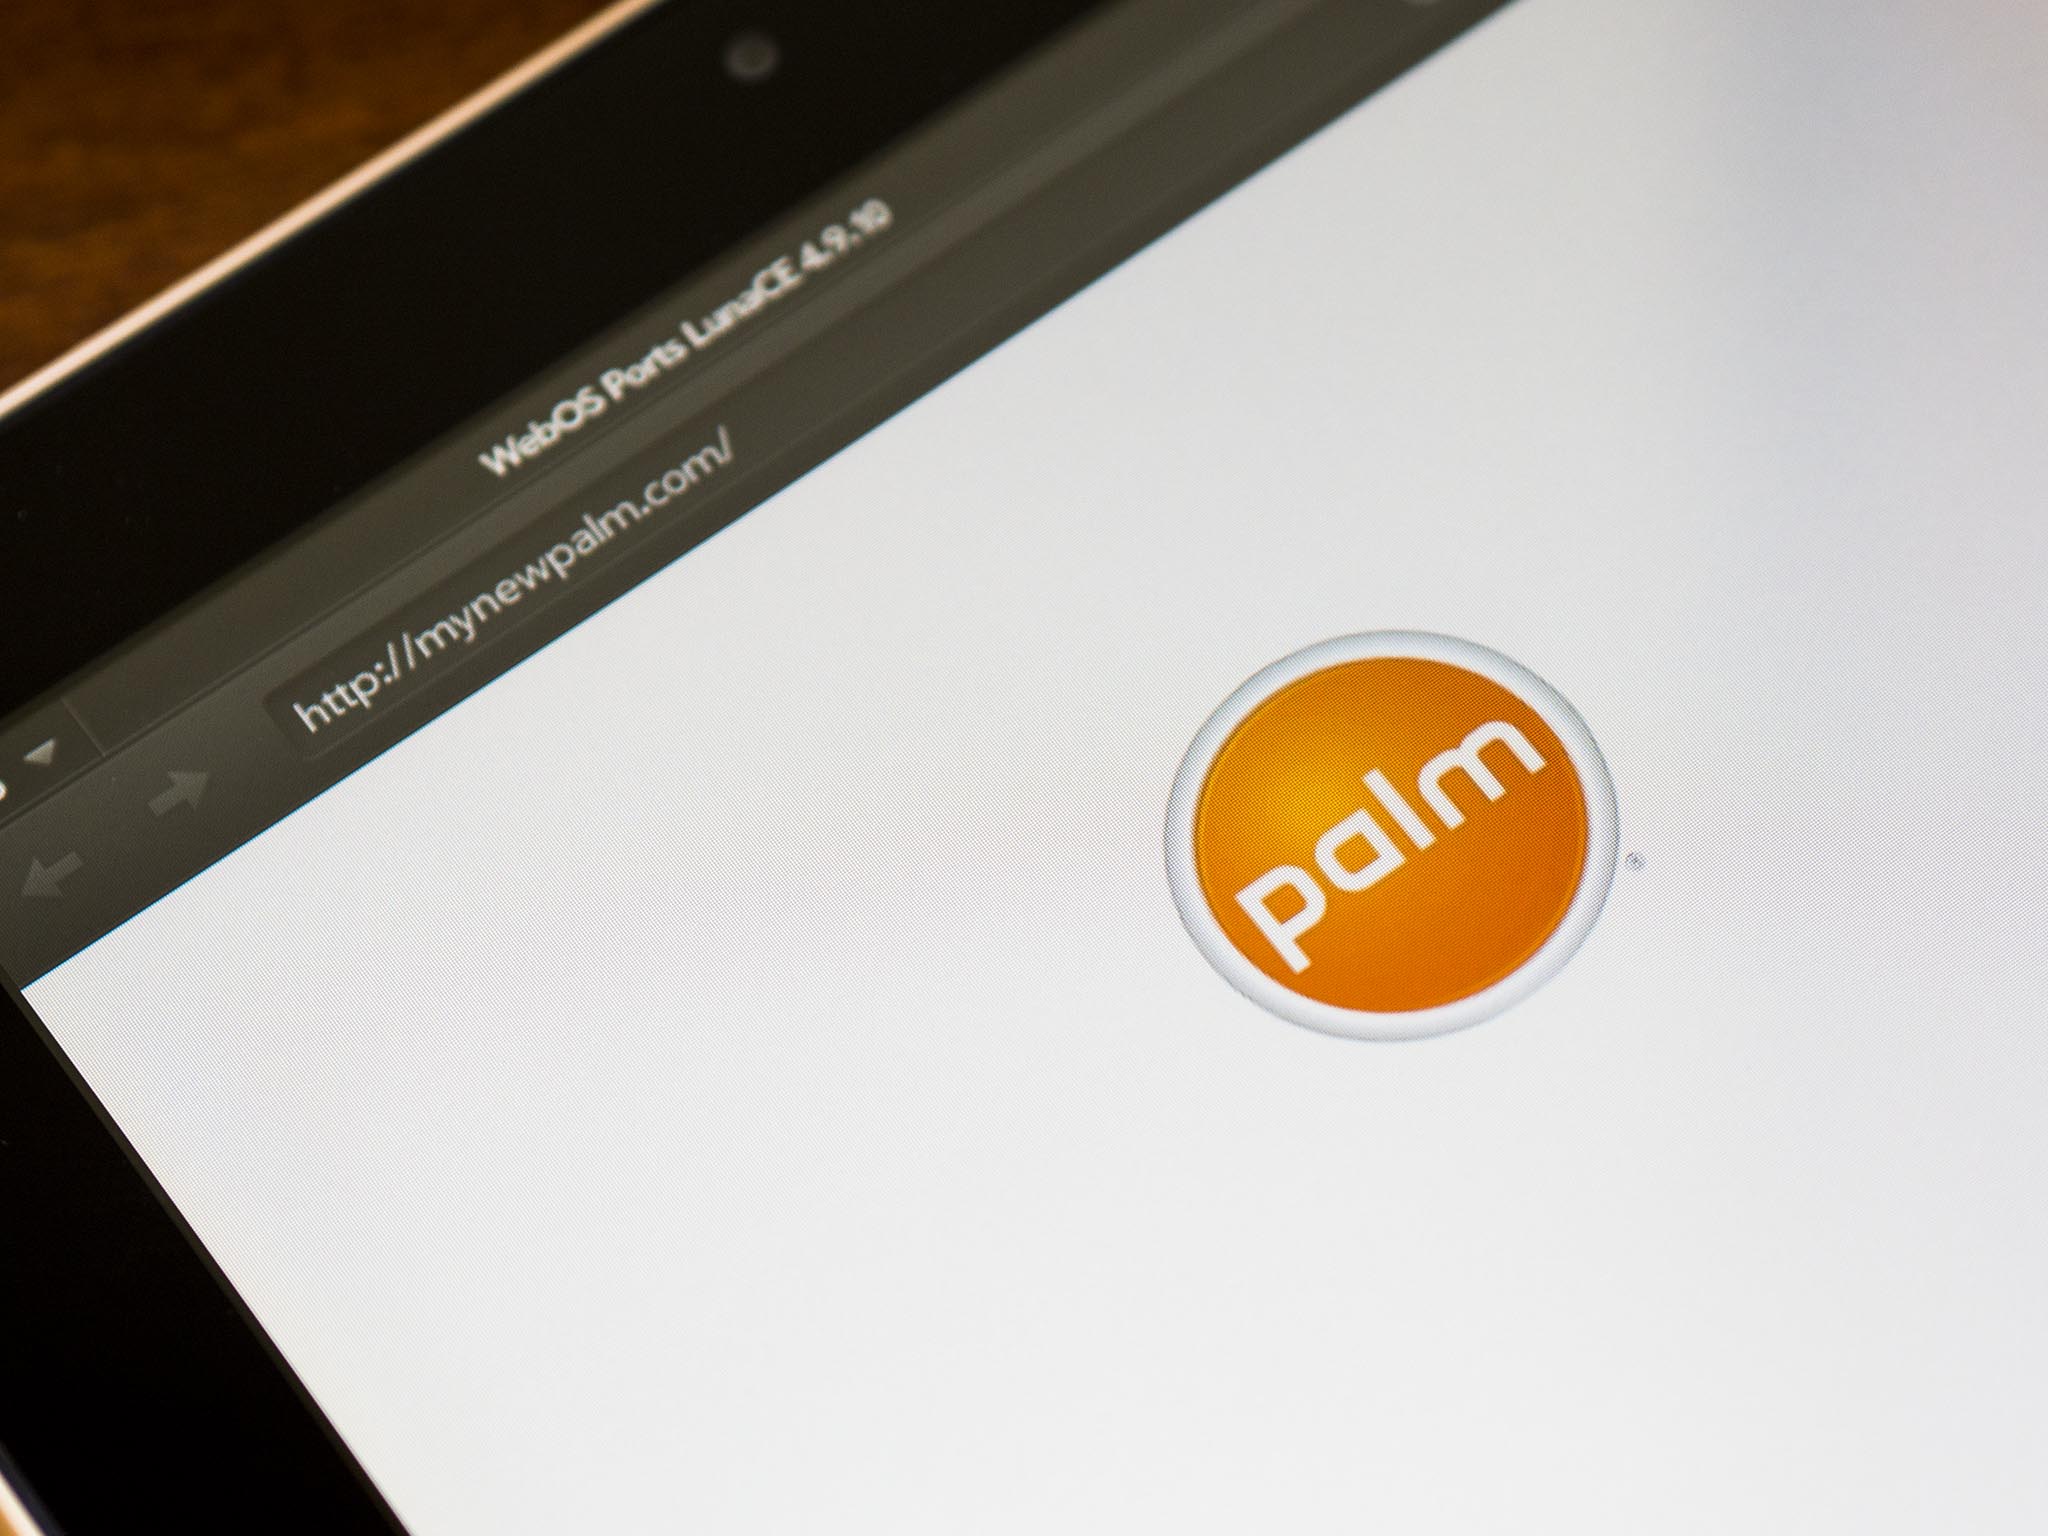 The Palm brand might be coming back, courtesy of Alcatel